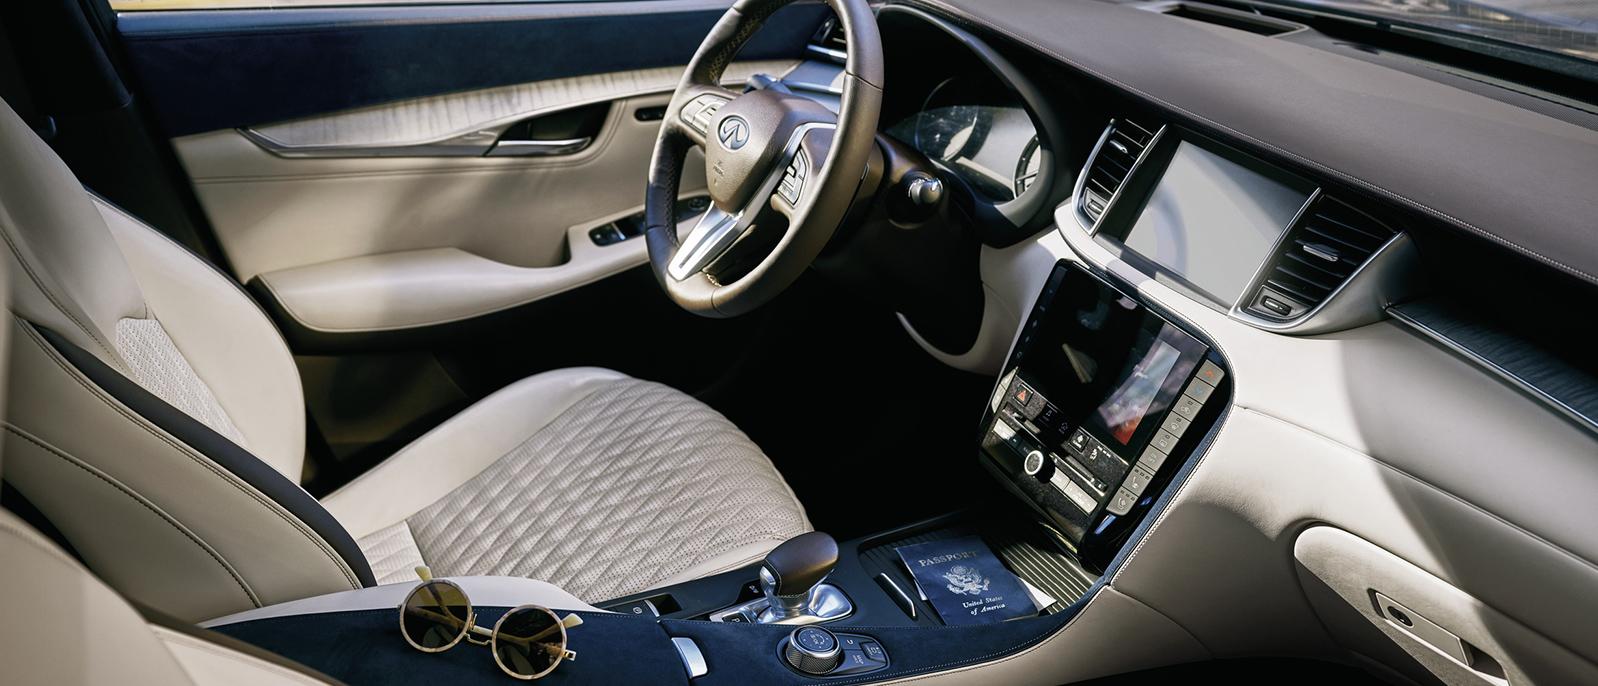 Interior view of the INFINITI QX50 featuring